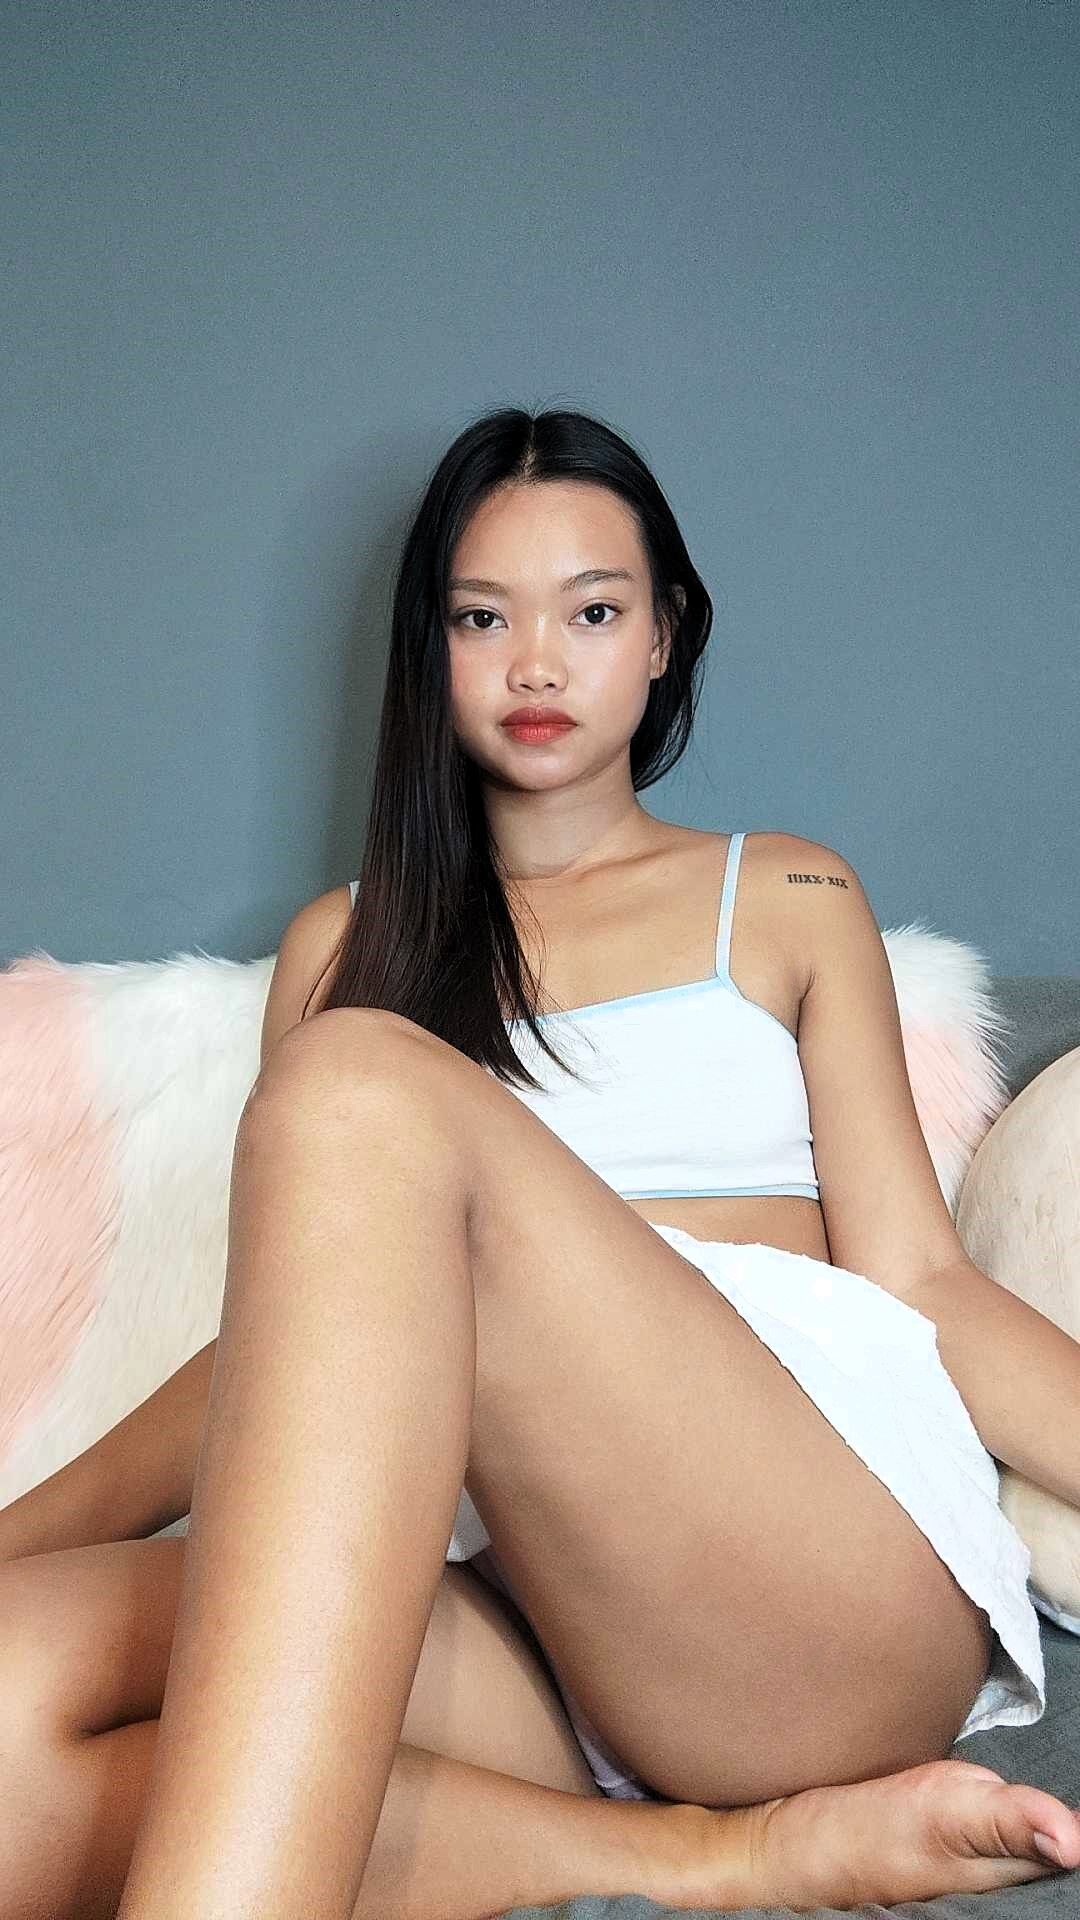 Abby Thai: Is it my panties you want to take off? 🤫